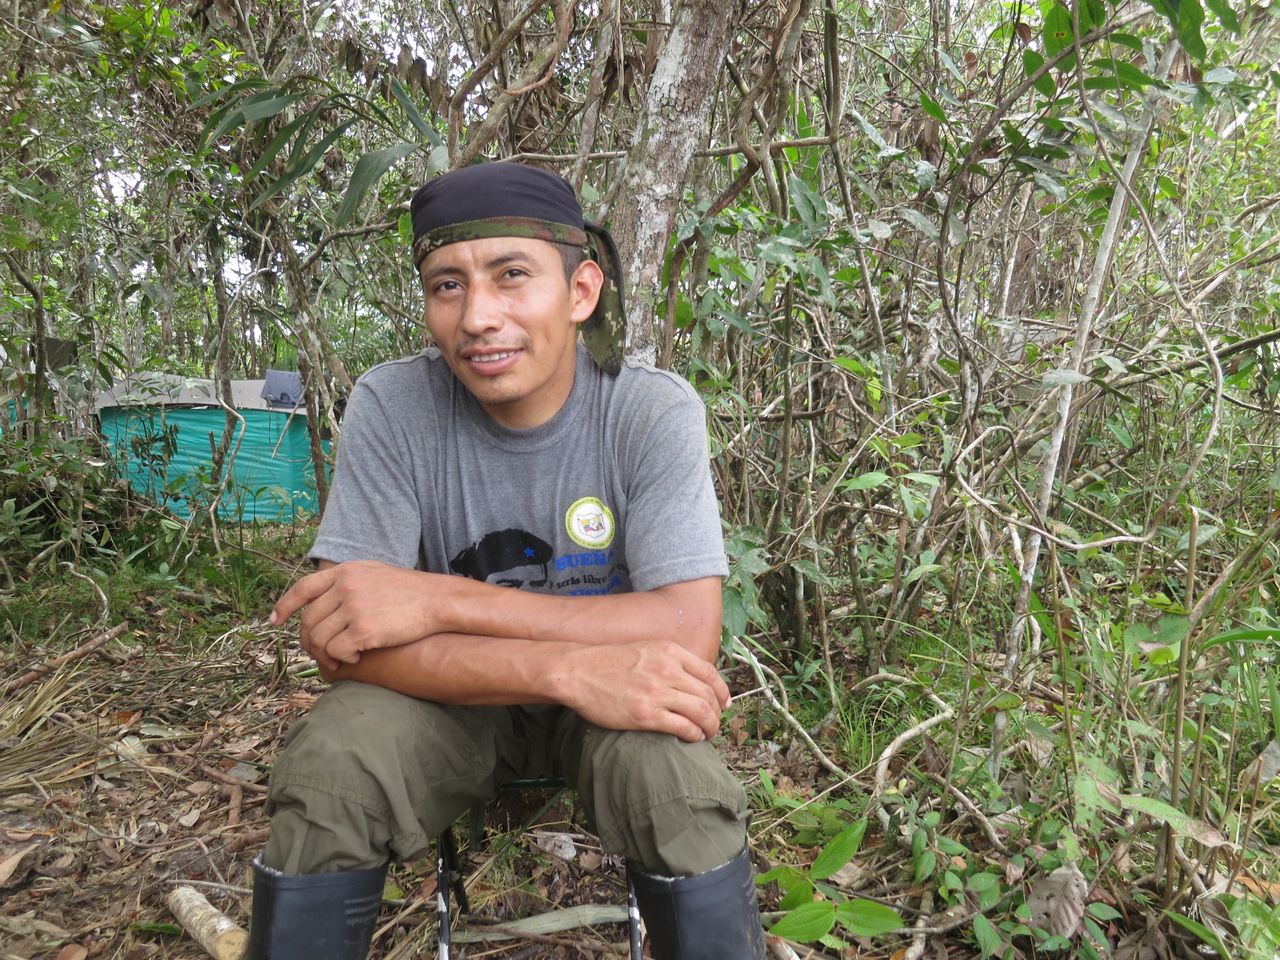 FARC fighter Roberto Méndez sits outside a guerrilla camp near where the FARC held its 10th conference, in the Yari Plains. Sept. 18.